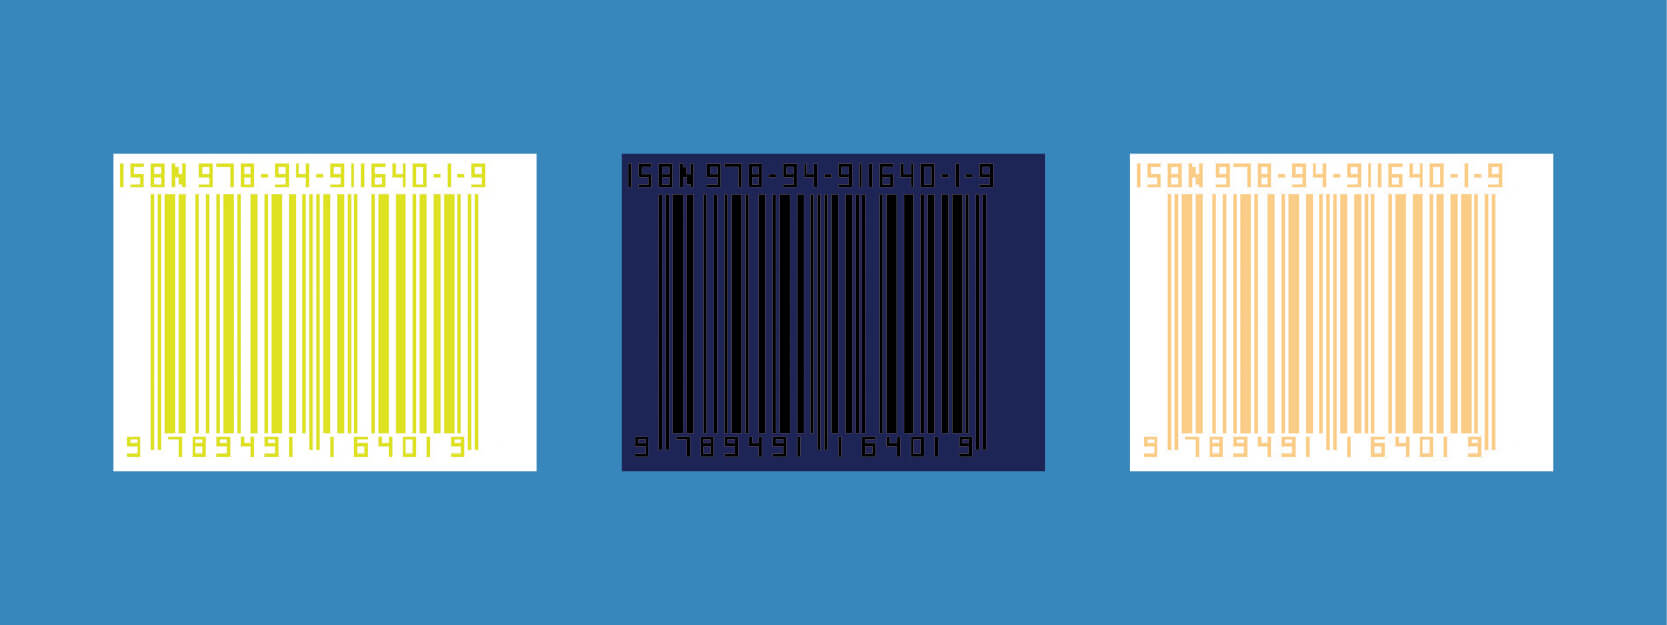 Barcode fout - niet voldoende contrast